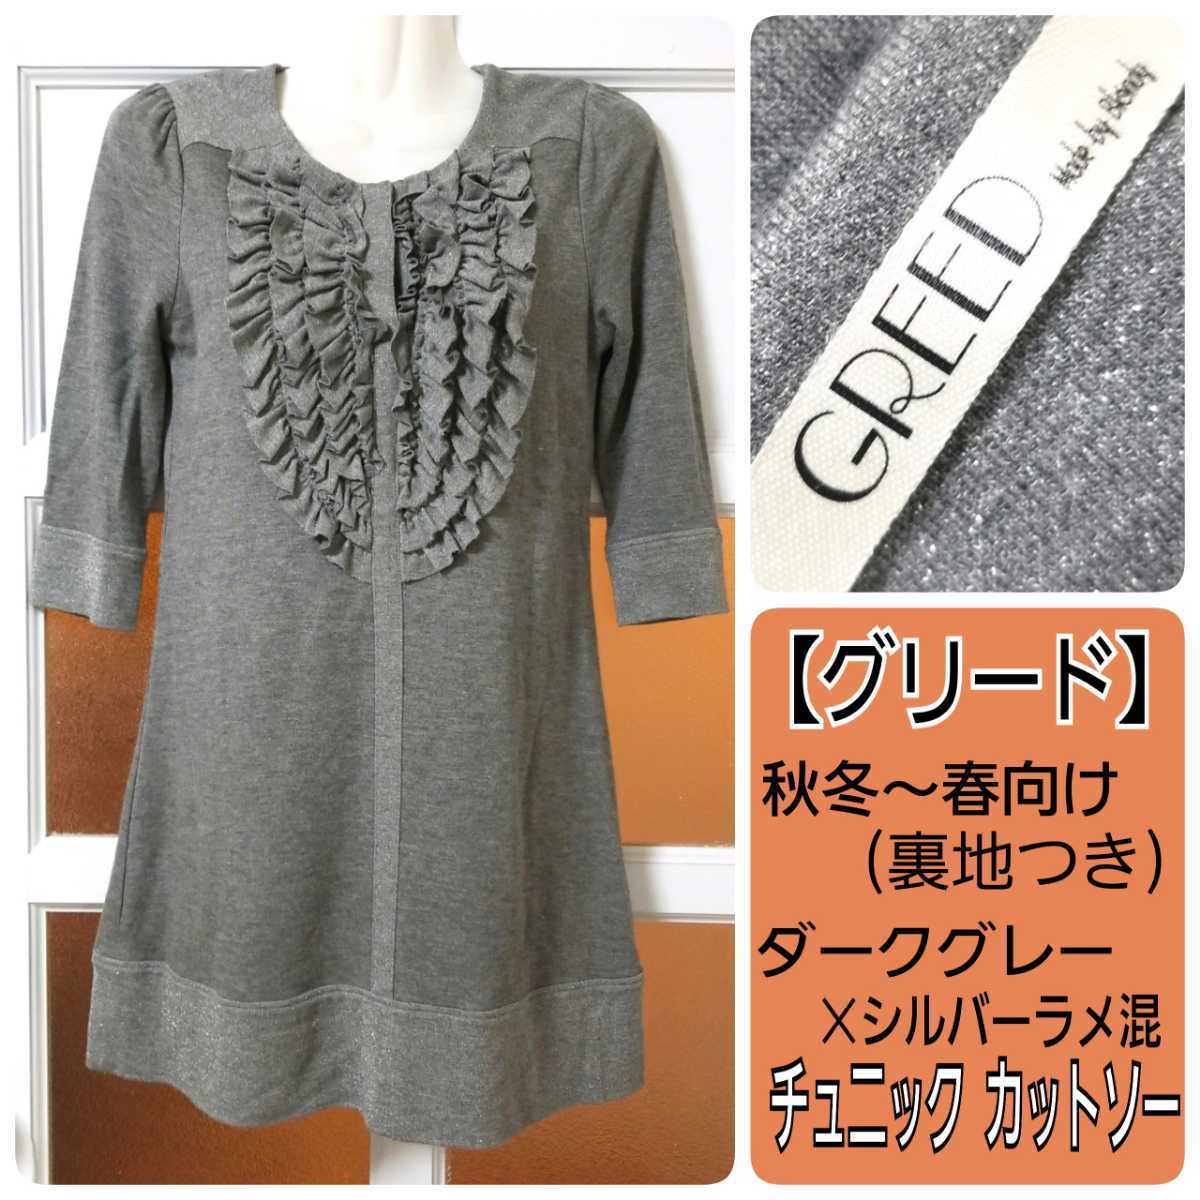  Greed autumn winter ~ spring lining attaching dark gray × lame 7 minute sleeve volume frill One-piece tunic 7 number S size 